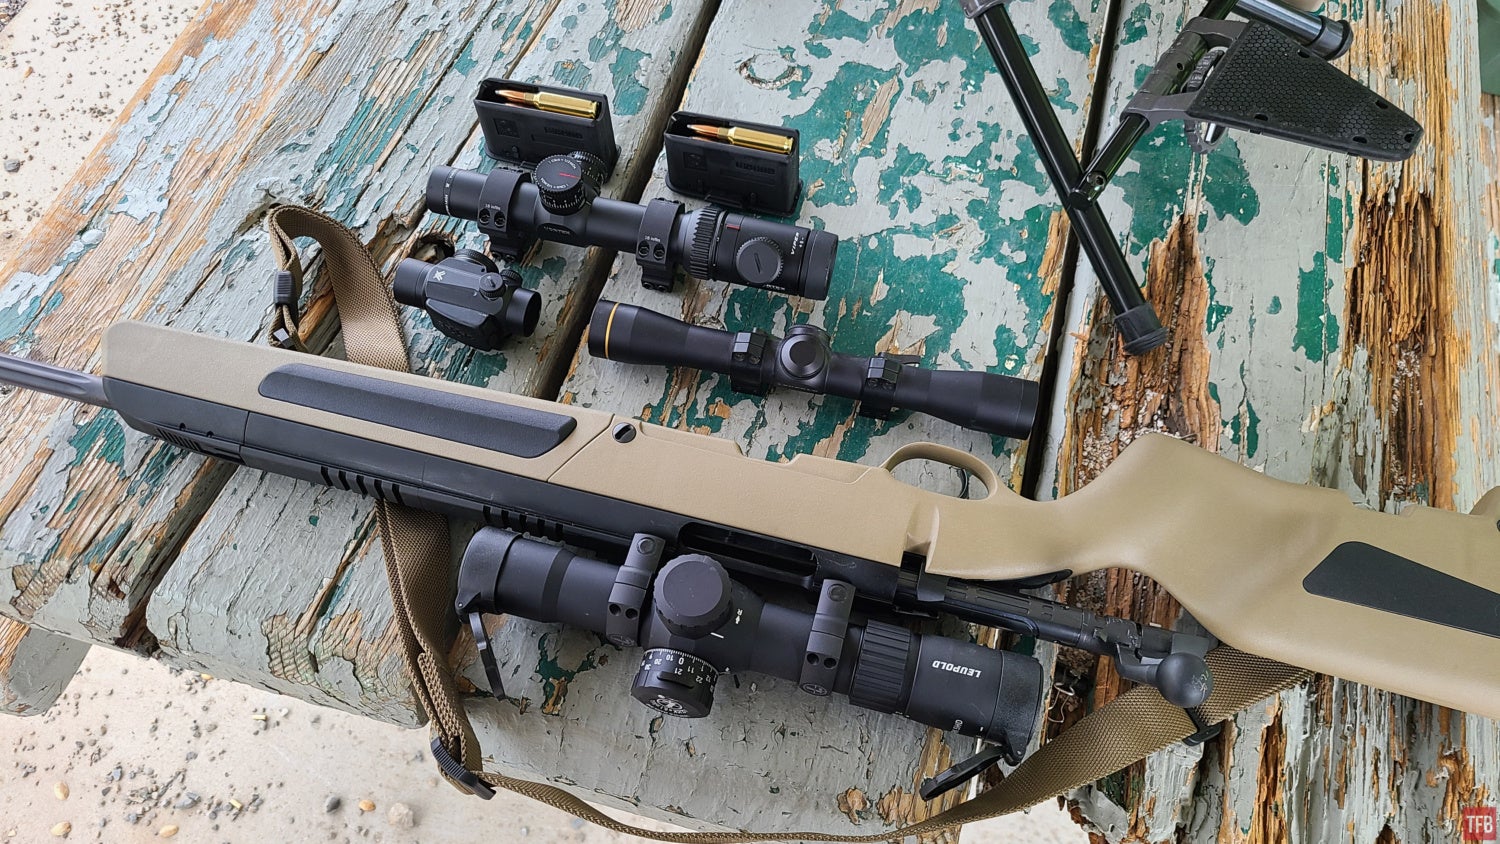 TFB Review: What Optic For A Steyr Scout? (Part 2)